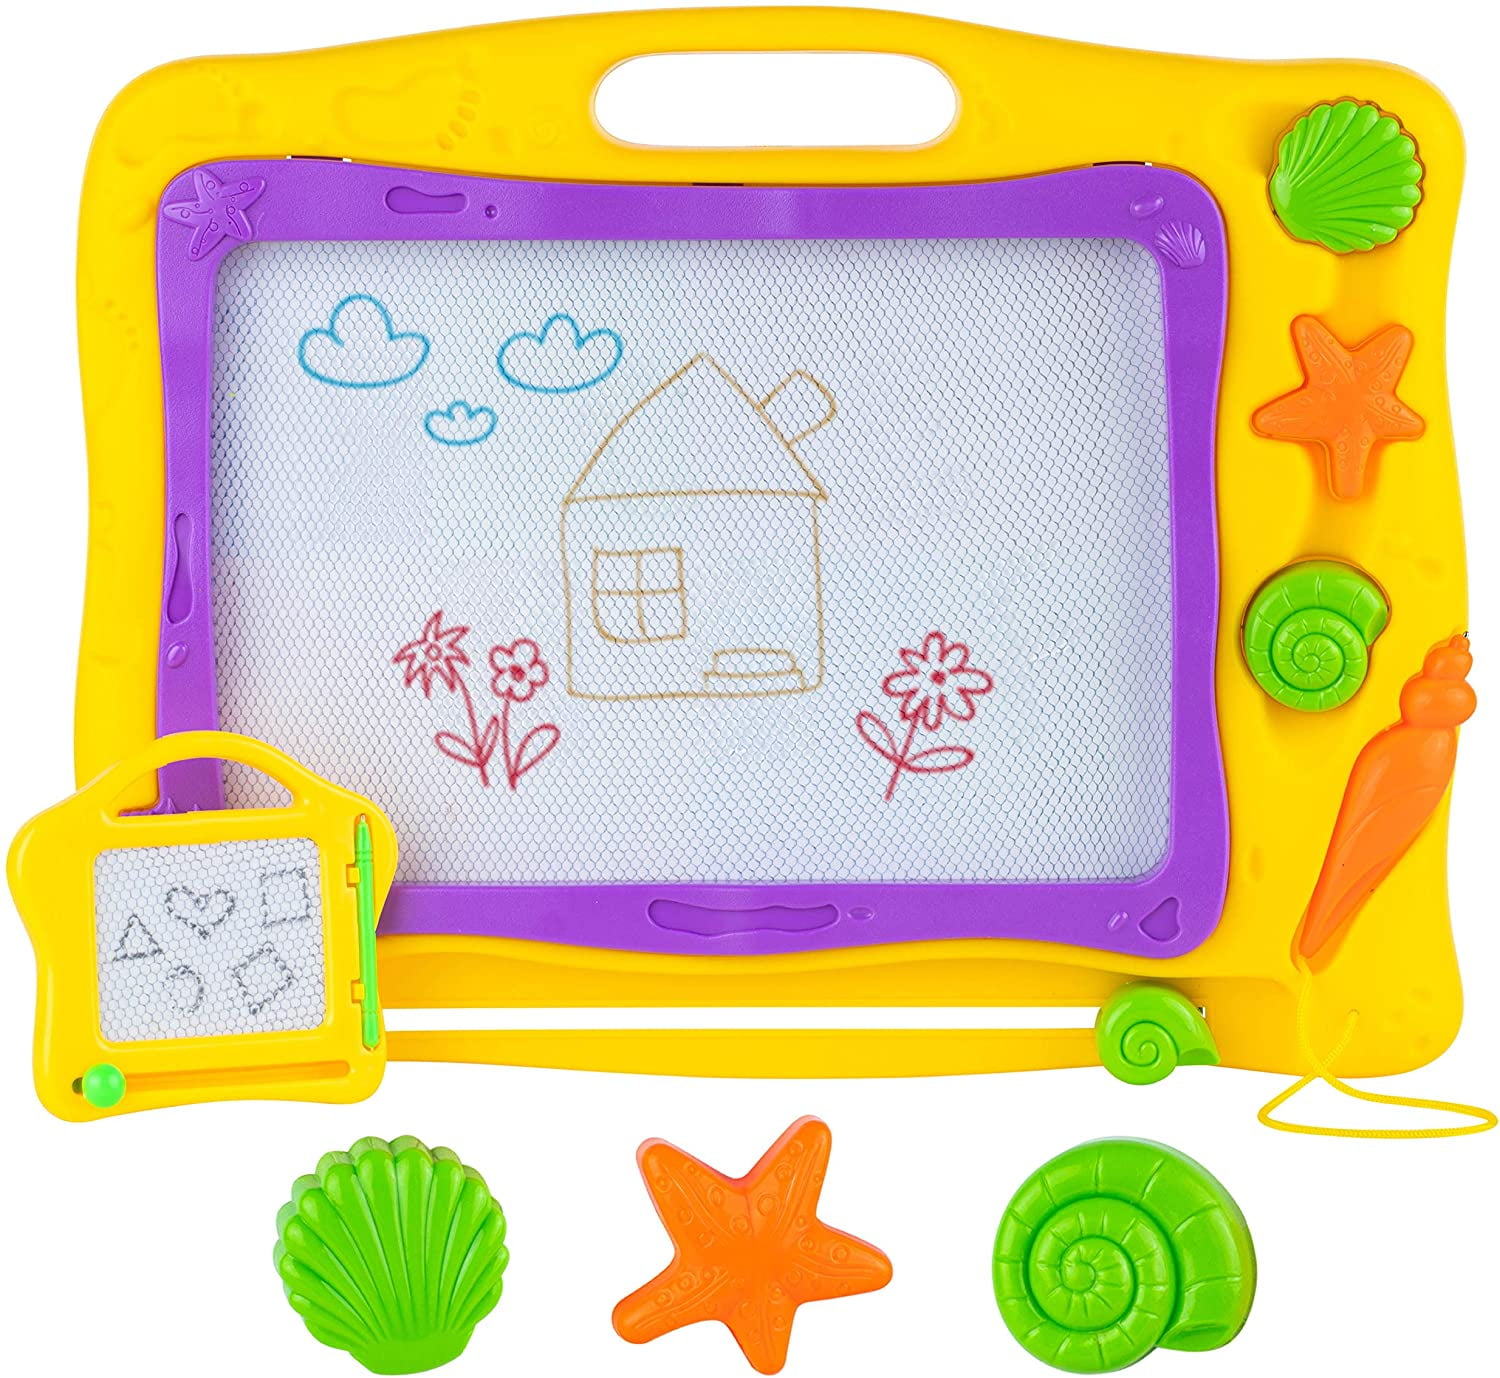 Magnetic Erasable Drawing Pad Gift for Kids Toddler Large Doodle Board Purple 